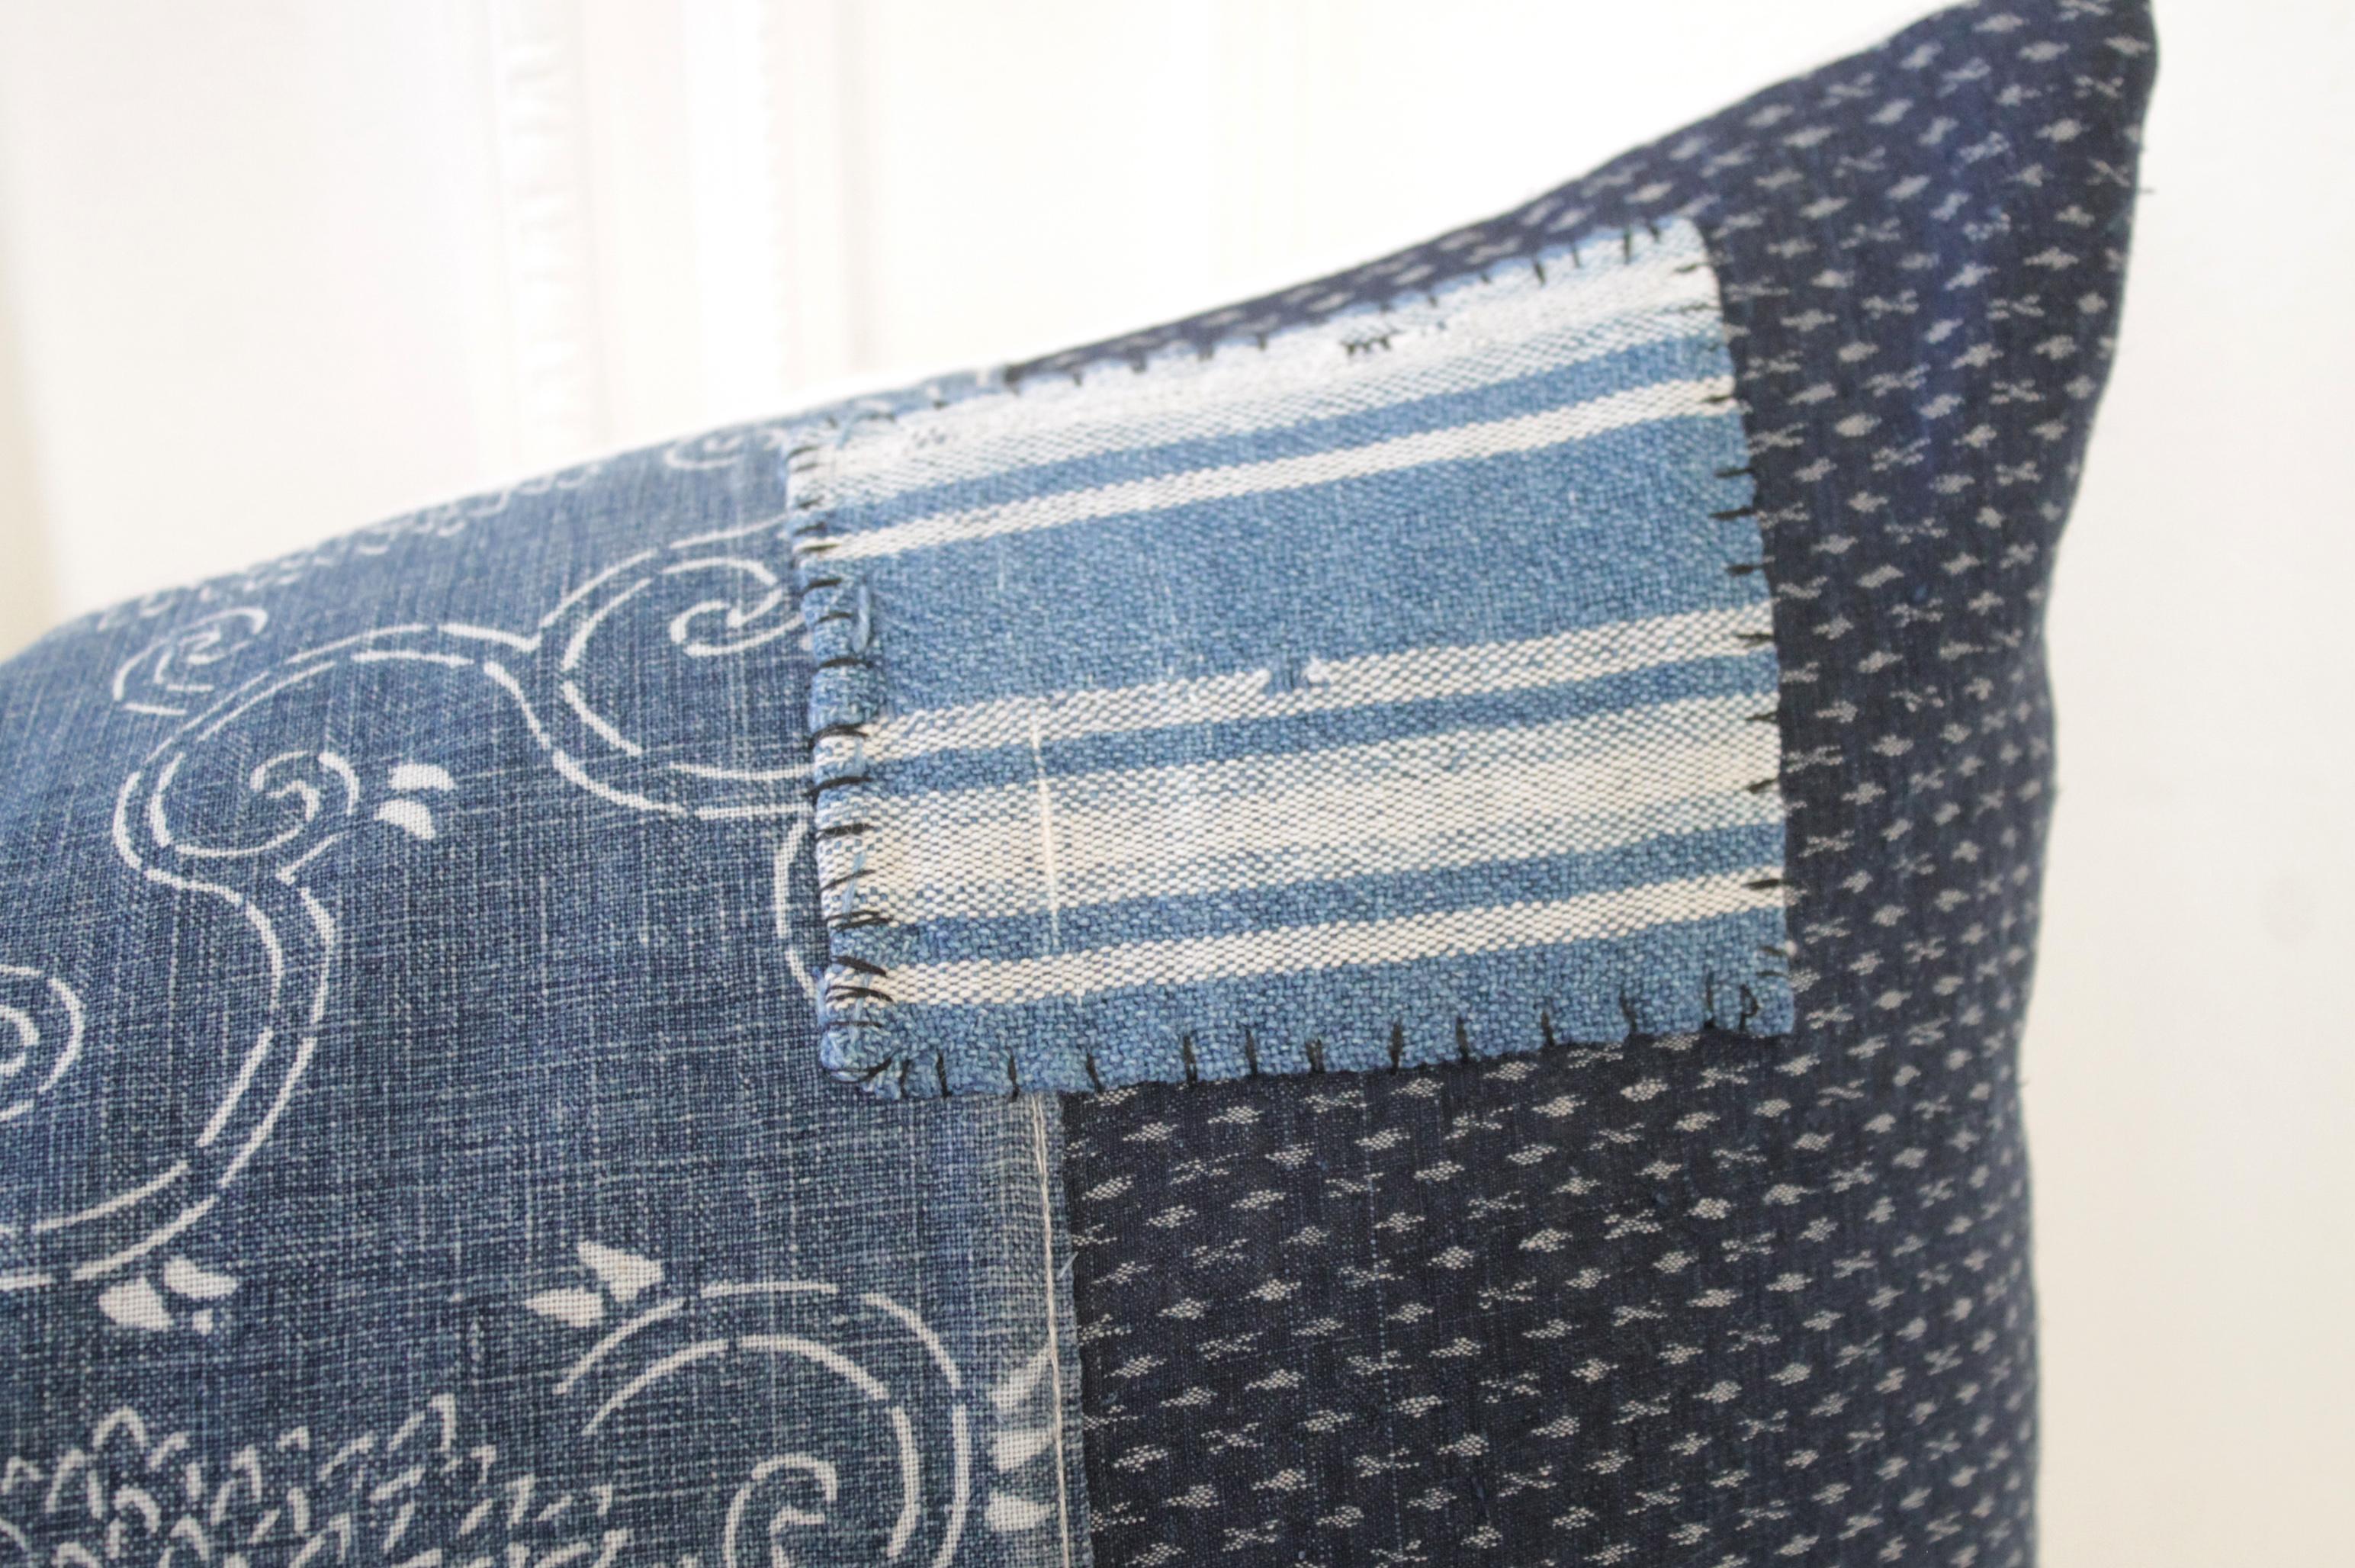 Antique Japanese Boro patchwork indigo lumbar pillow
Size: 14 x 20
Hidden zipper closure, face is lined. Dry cleaning recommended
Custom designed in our studio with antique pieces of indigo blue boro fabric, this patchwork pillow would make a